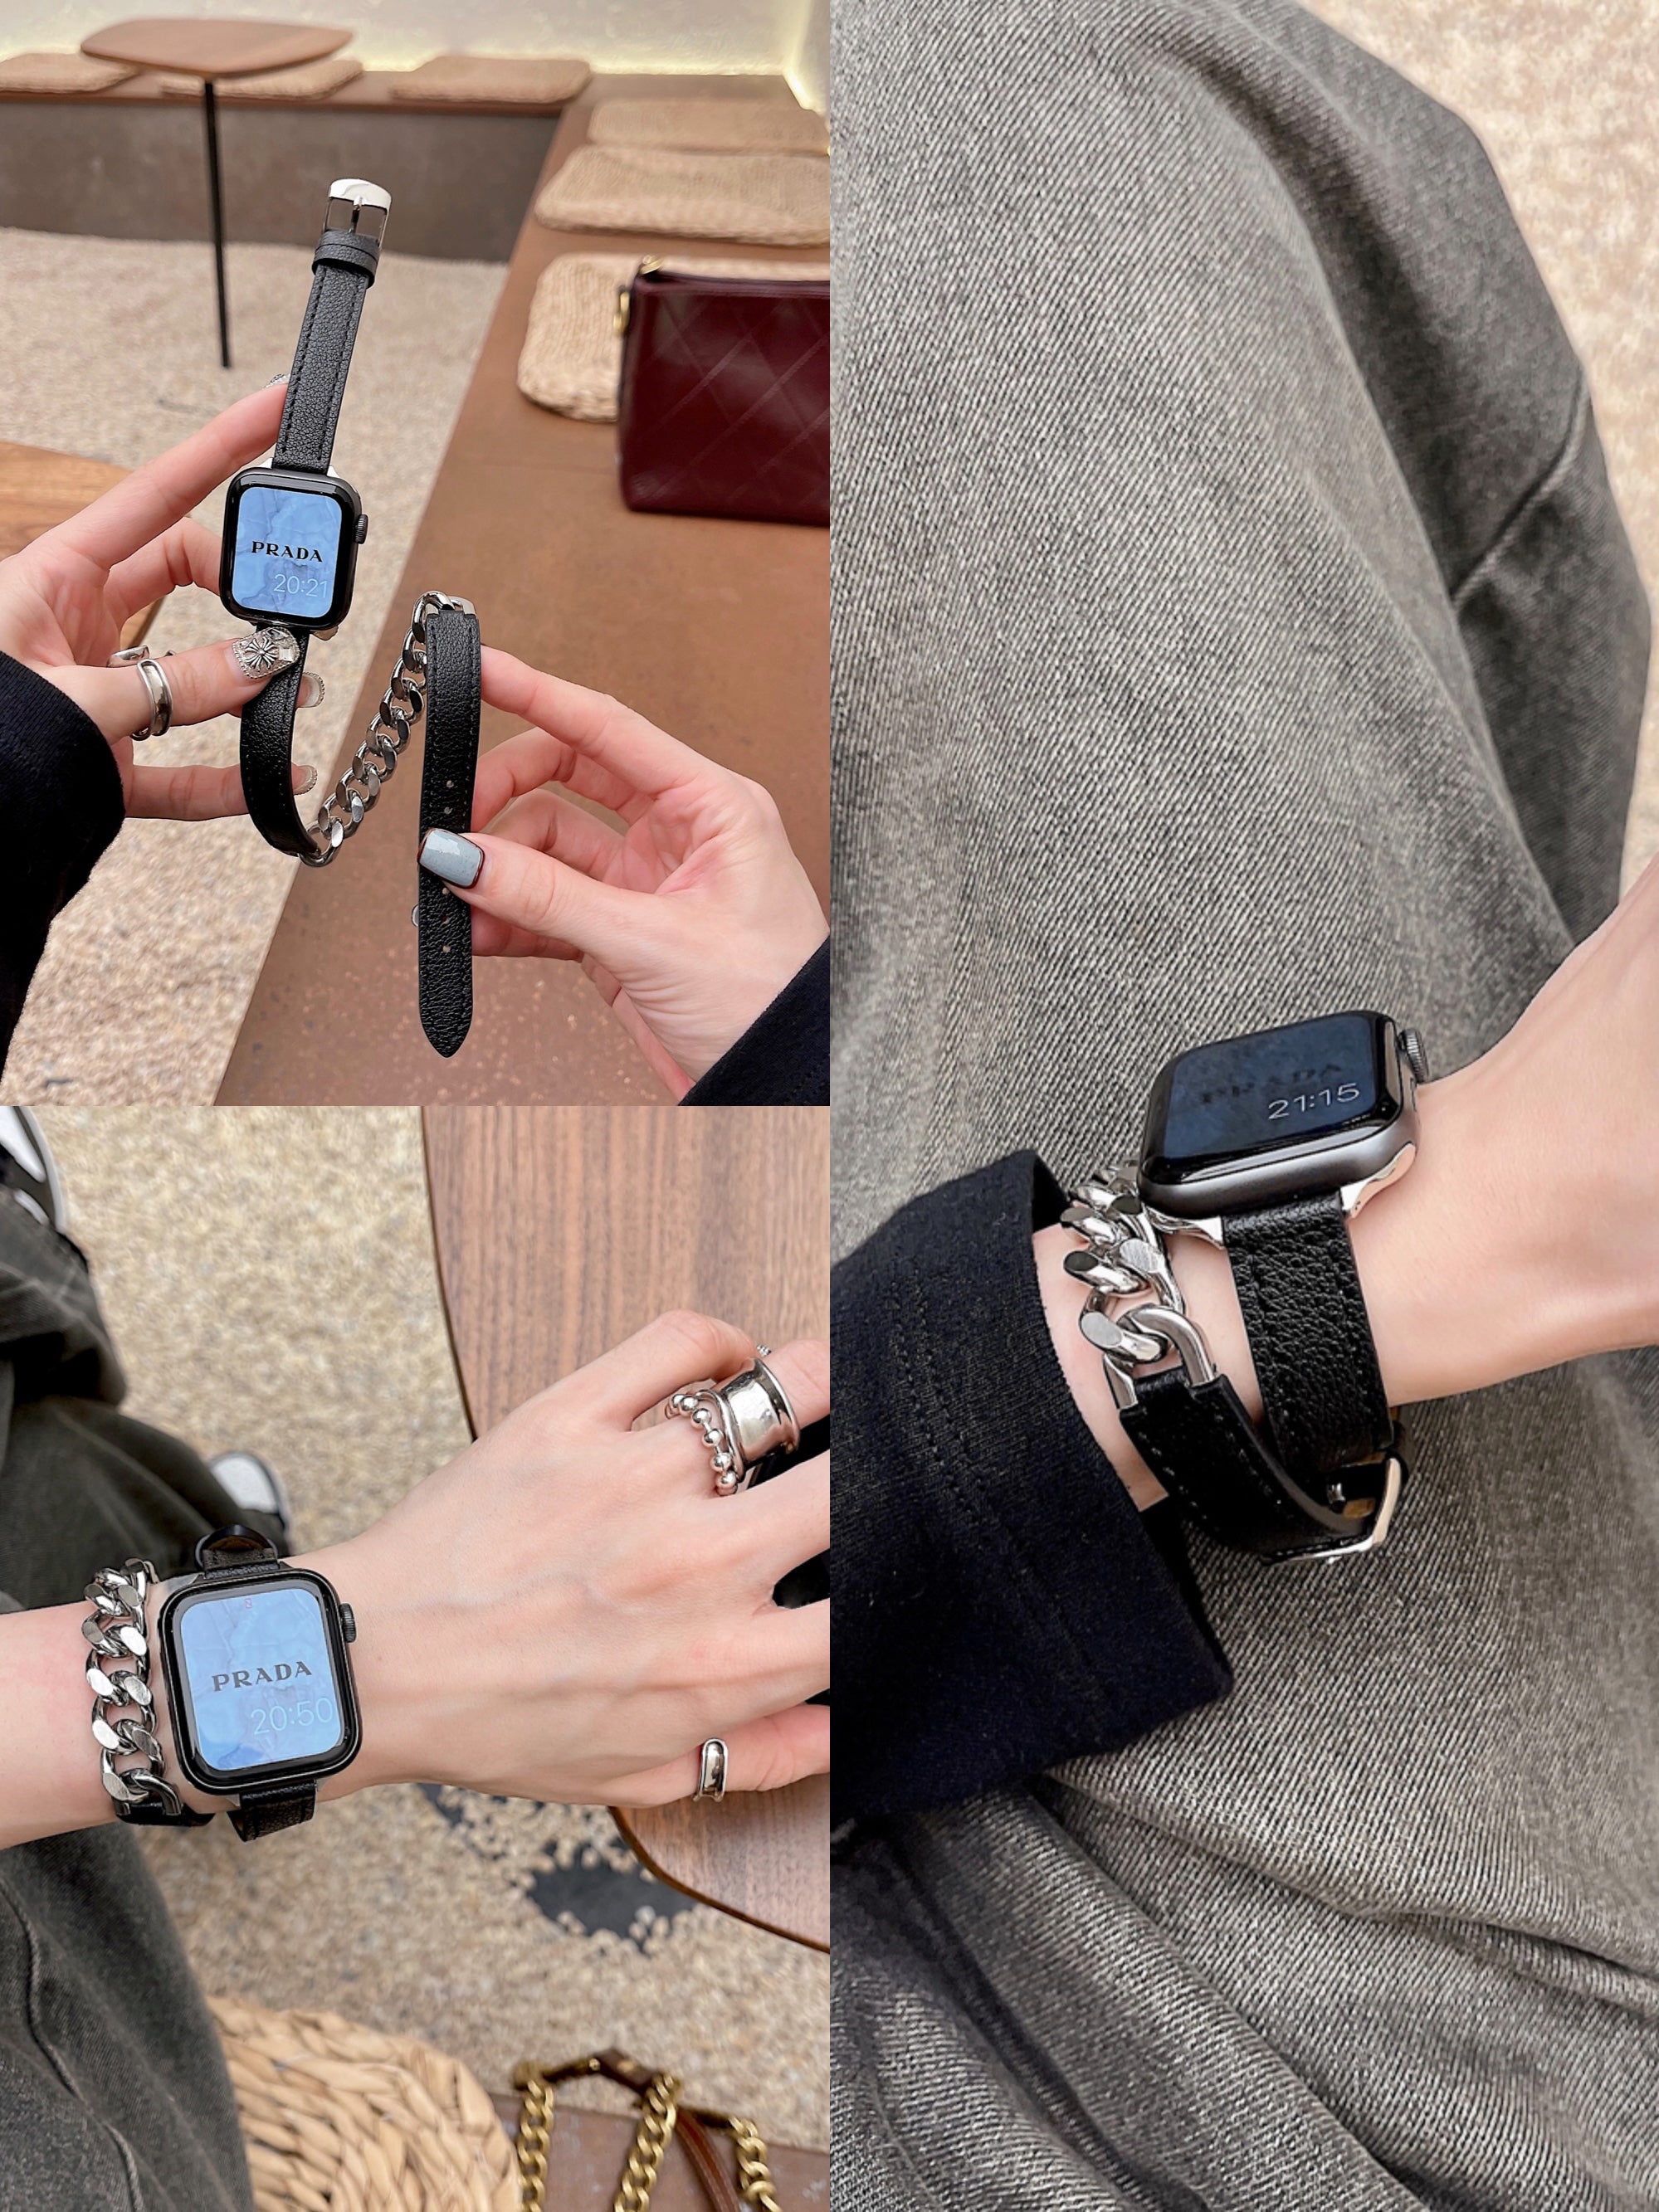 iWatch Metal + Leather Watch Chain 1/2/3/4/5/6/7